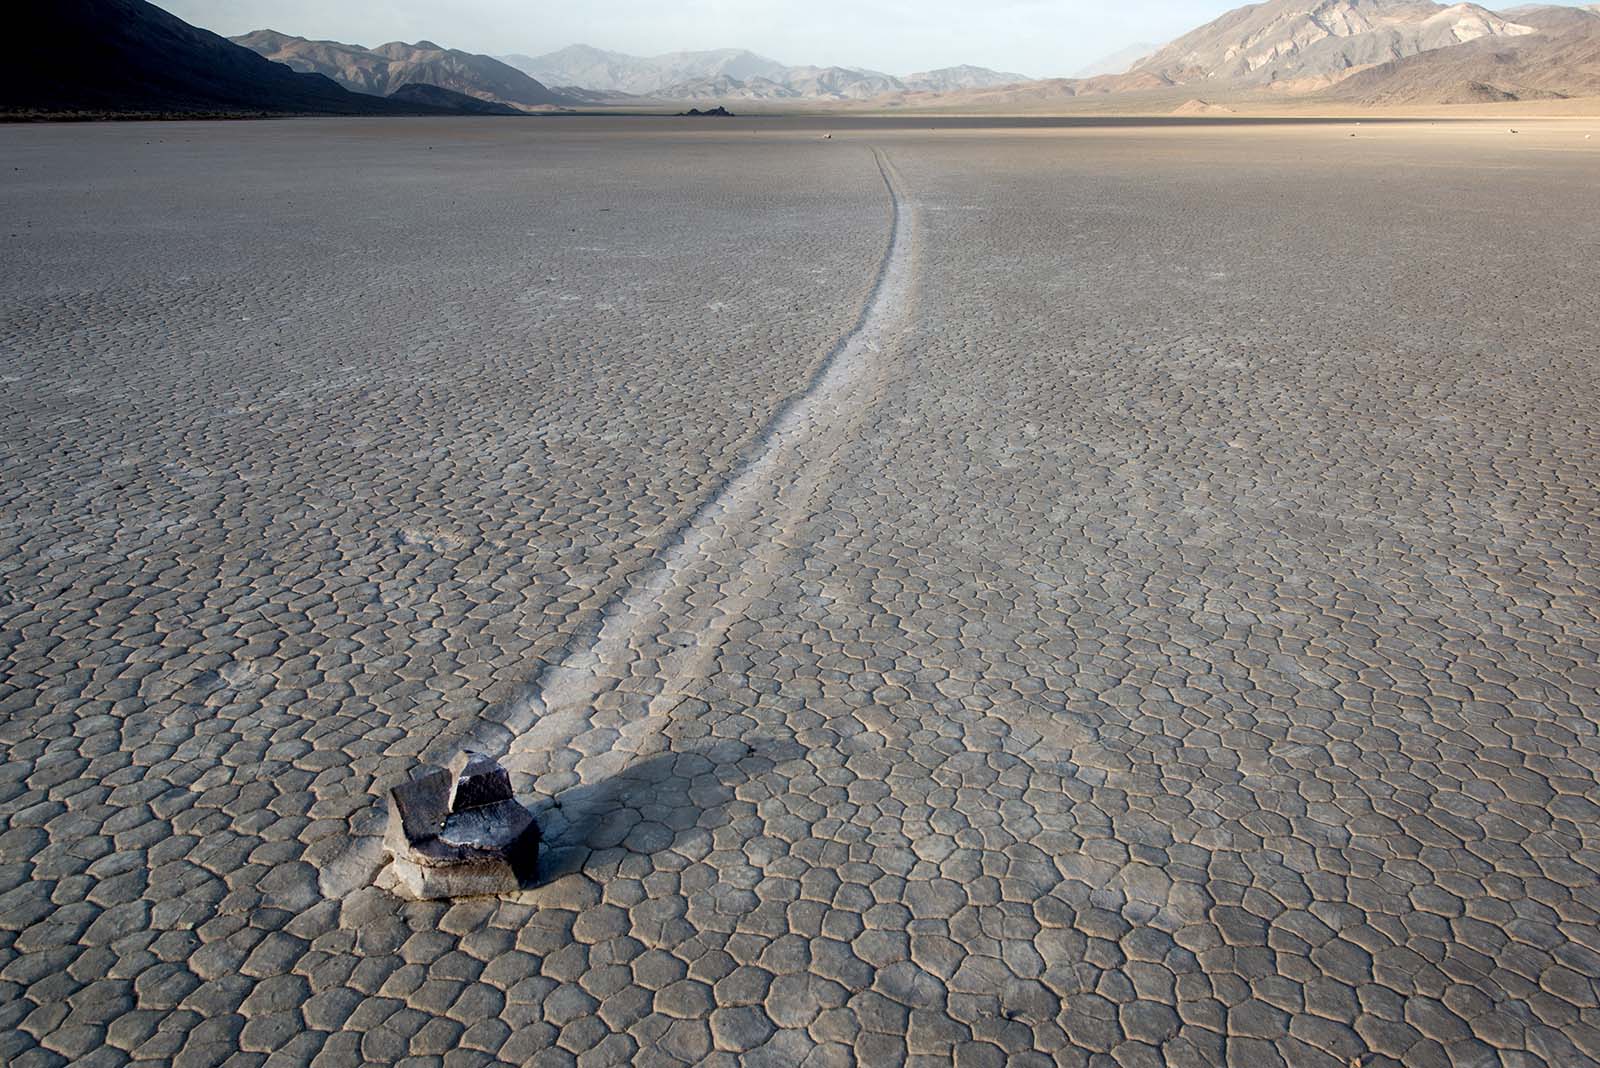 One of the mysterious sailing stones at Racetrack Playa, Death Valley National Park.